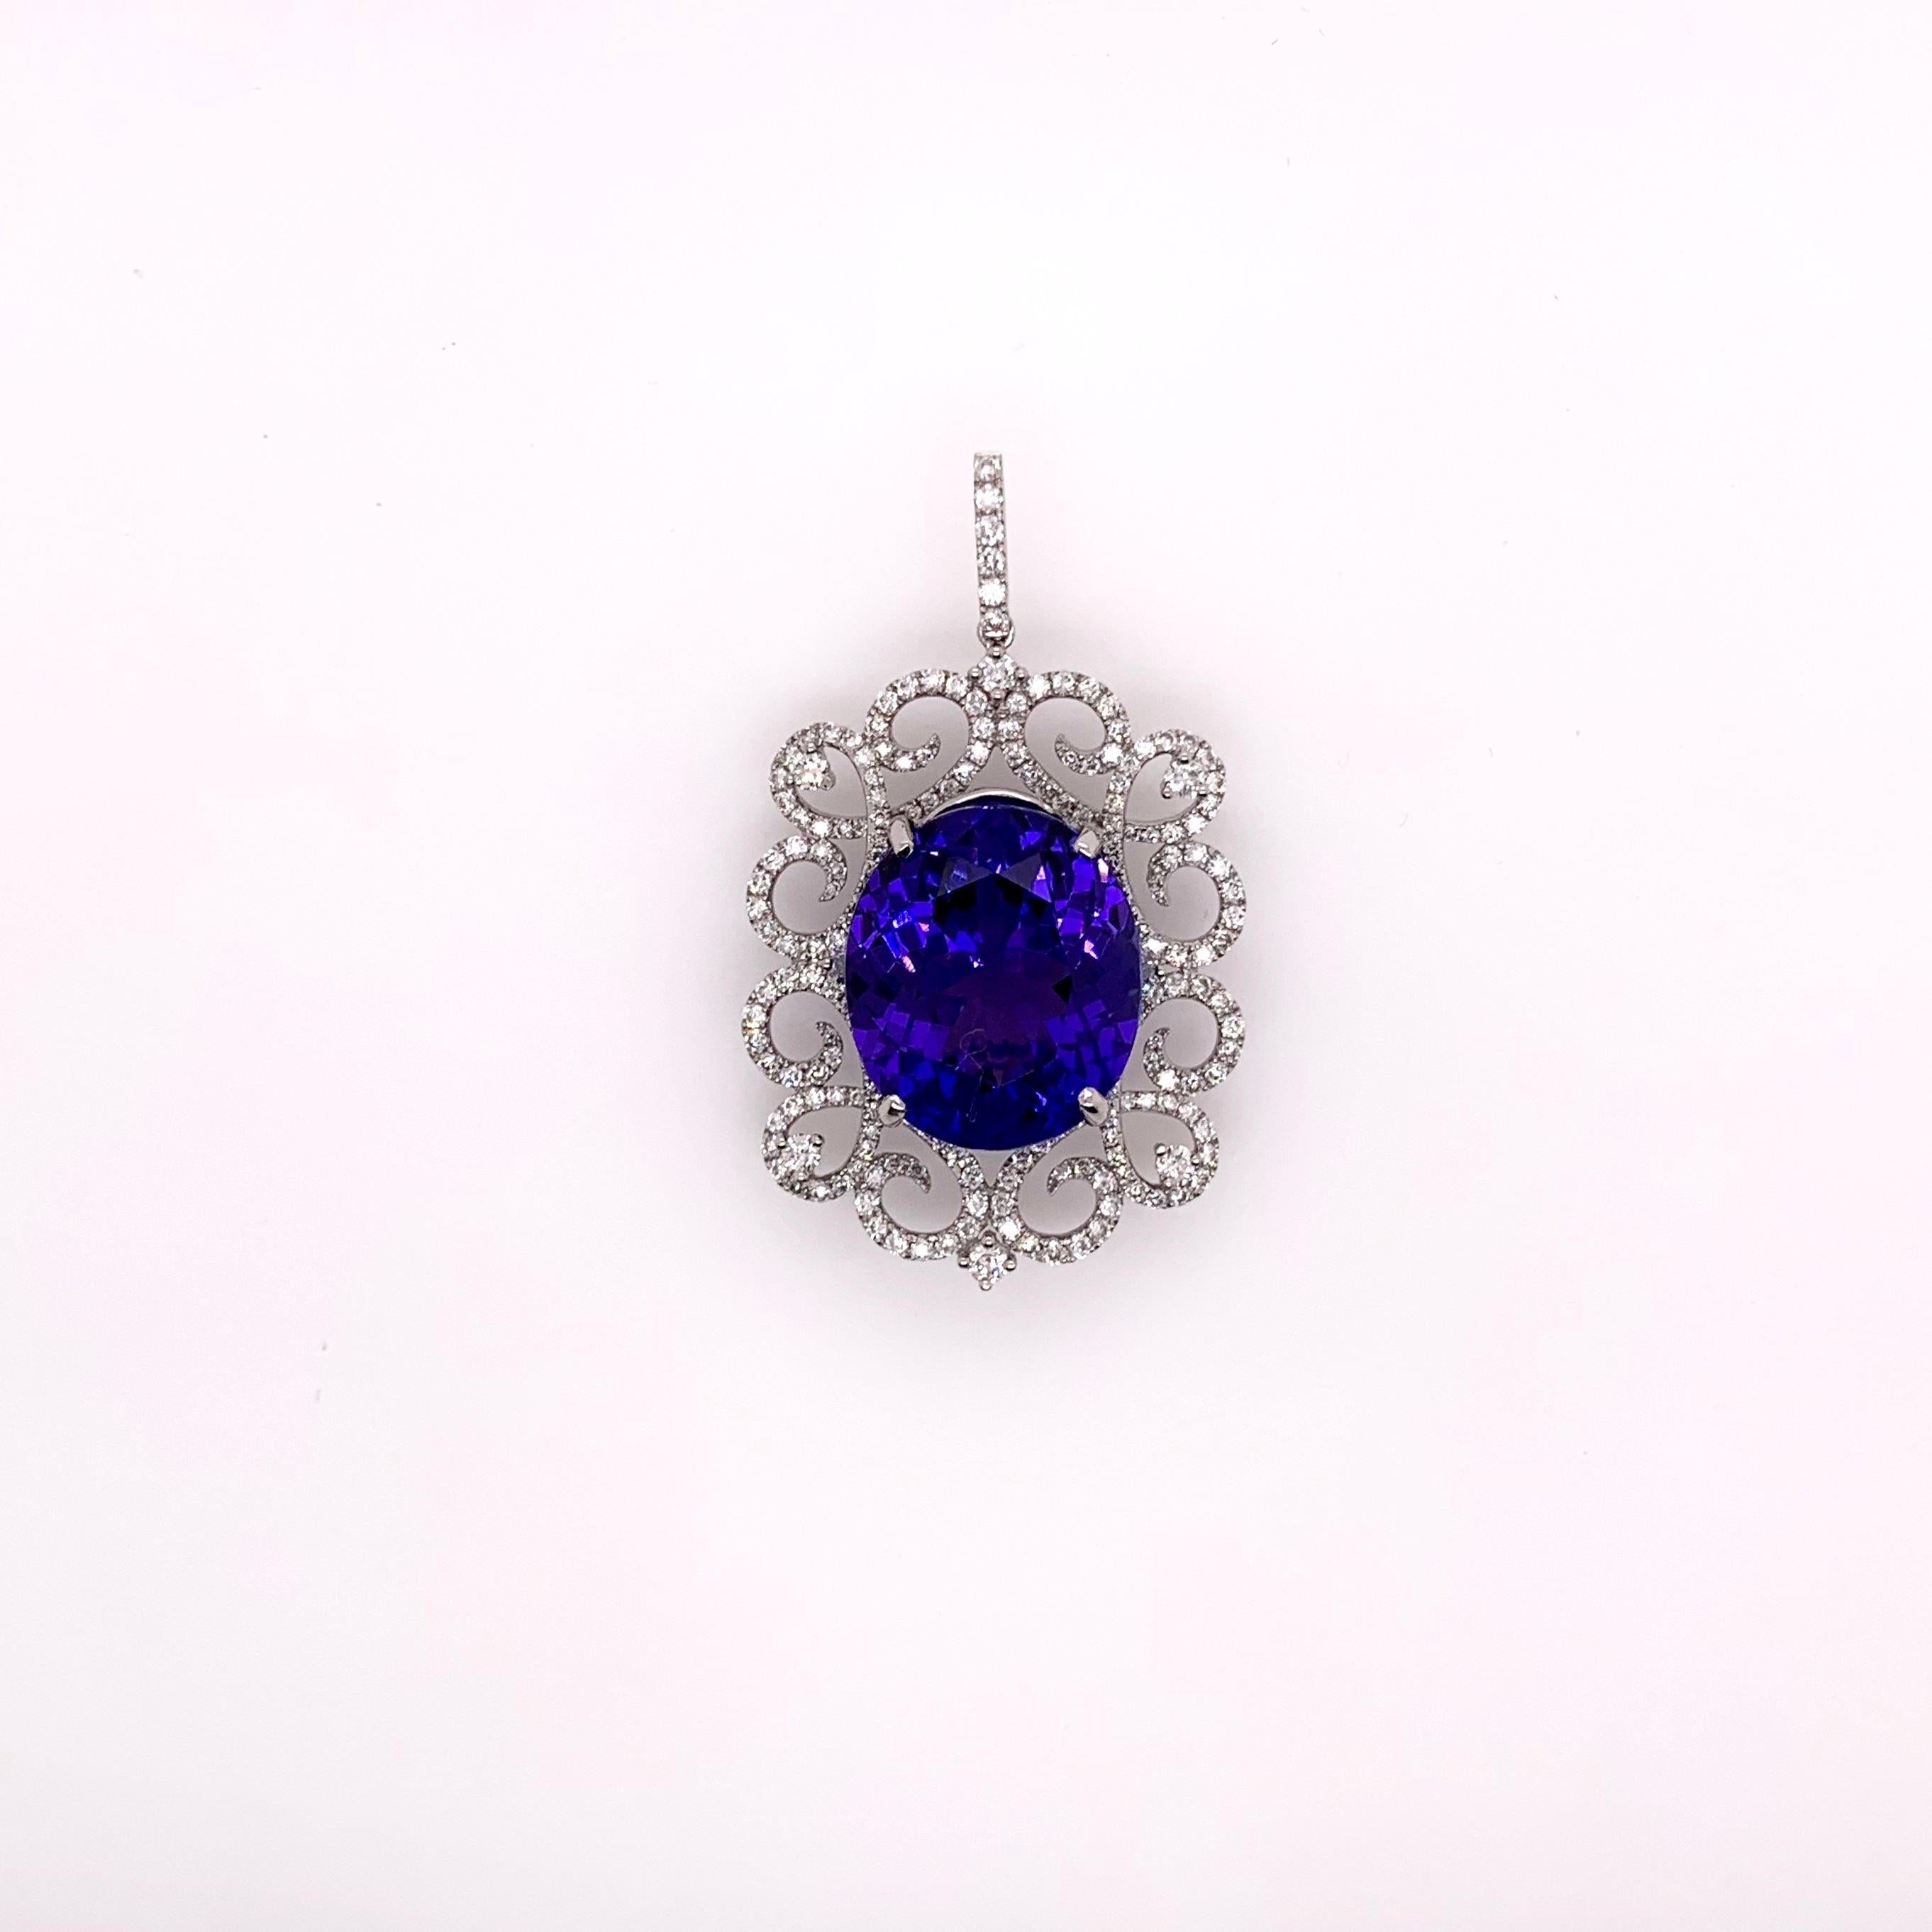 This stunning tanzanite is set in a gorgeous, symmetrical diamond setting that further highlights the top quality tanzanite.  The meticulous details involved in this setting truly catches everyone's attention.

Tanzanite: 18.80 cts, Oval